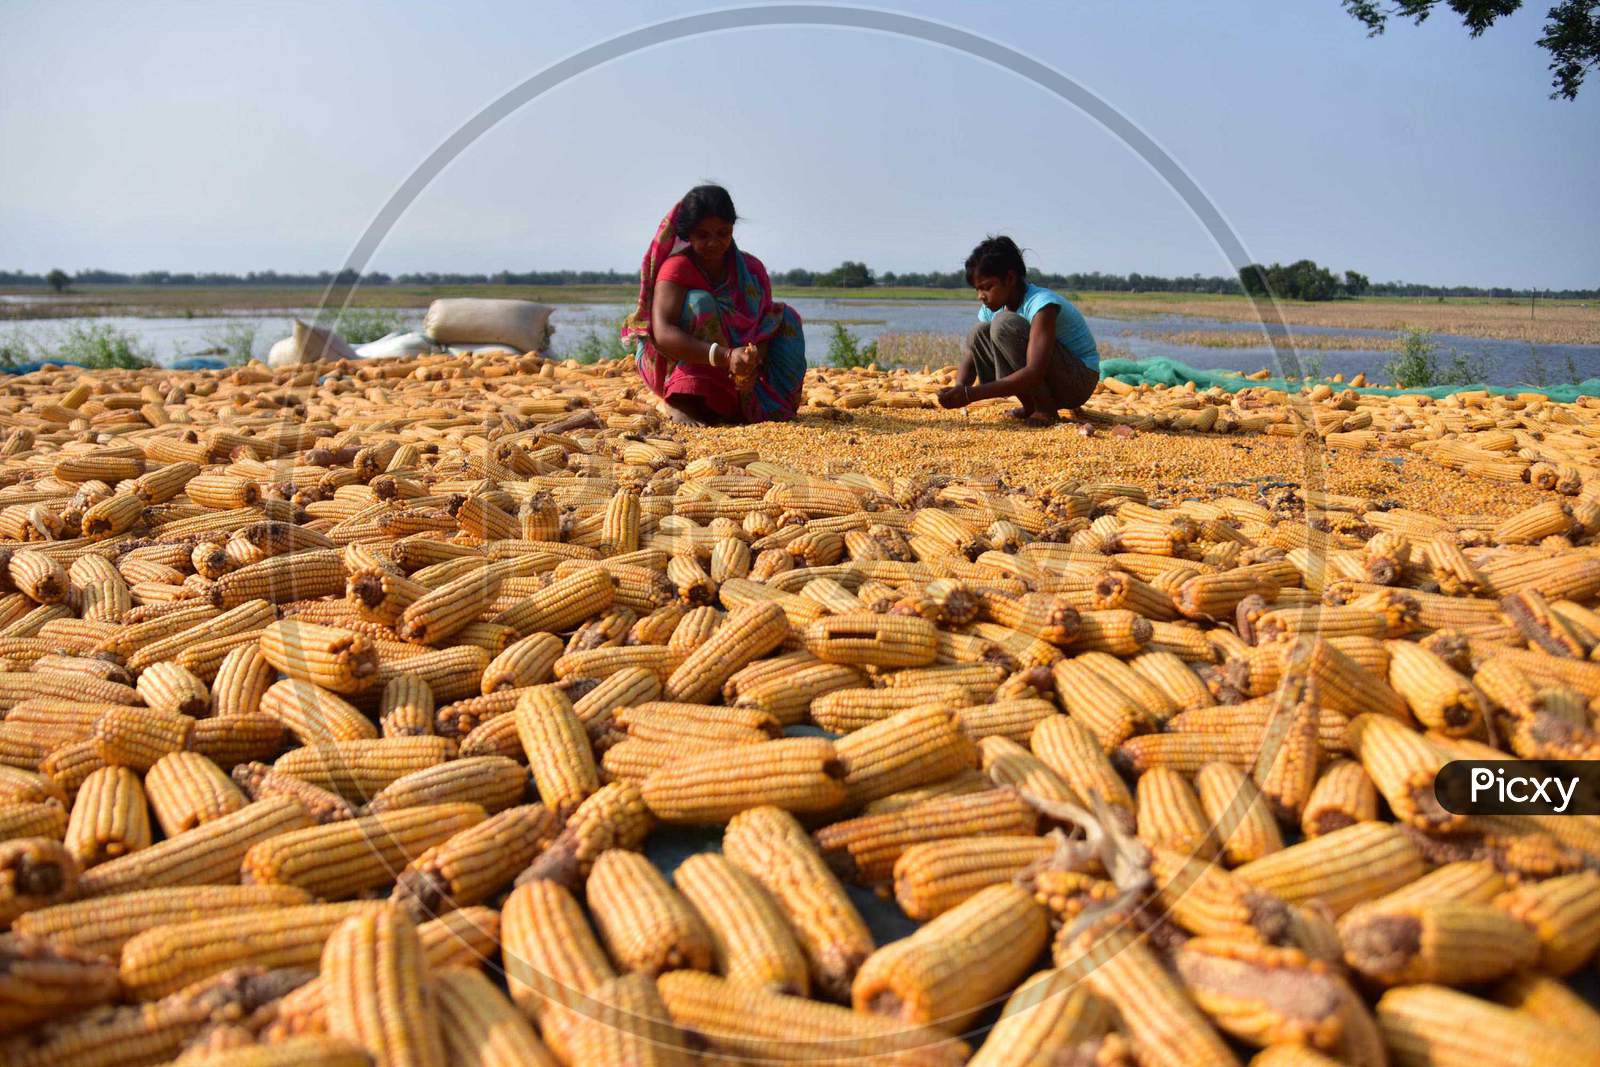 Women  Spread Maize Husks To Dry In A Field In Morigaon District Of Assam ,India On June 5,2020.